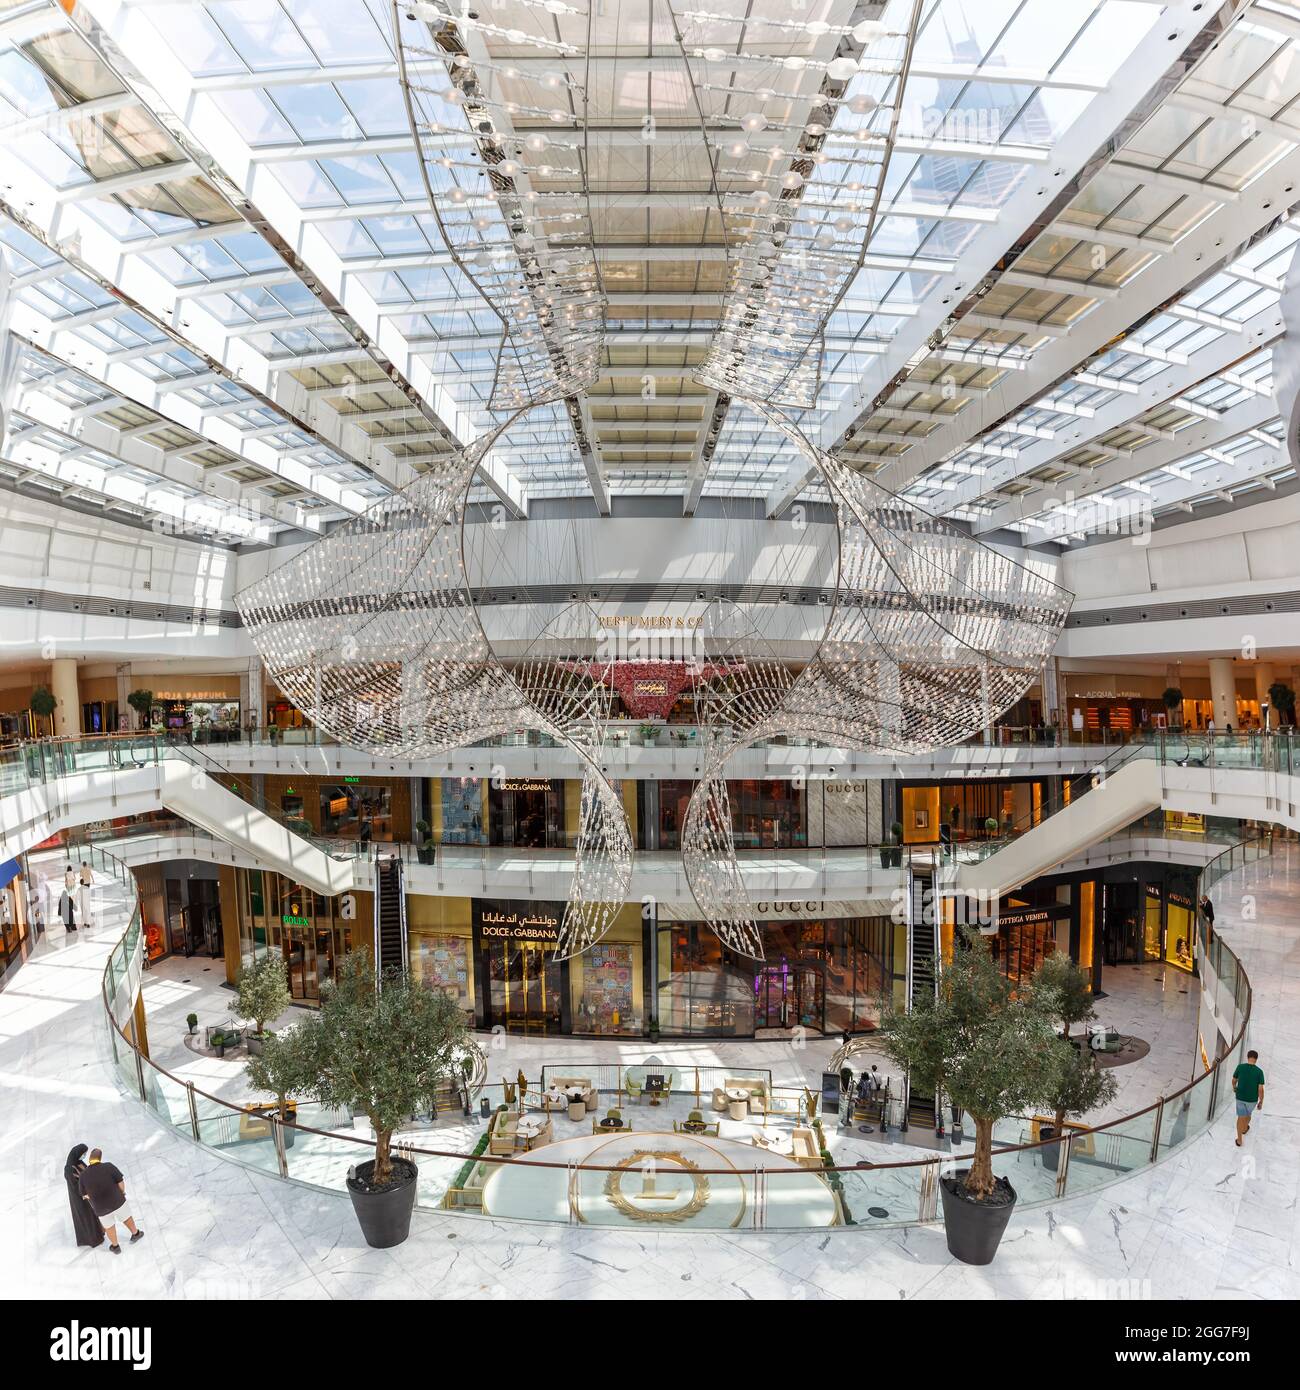 Louis Vuitton, Chanel, Gucci, at the Fashion Avenue, with 70 world brand  shops of the Haute Couture, Mall Stock Photo - Alamy